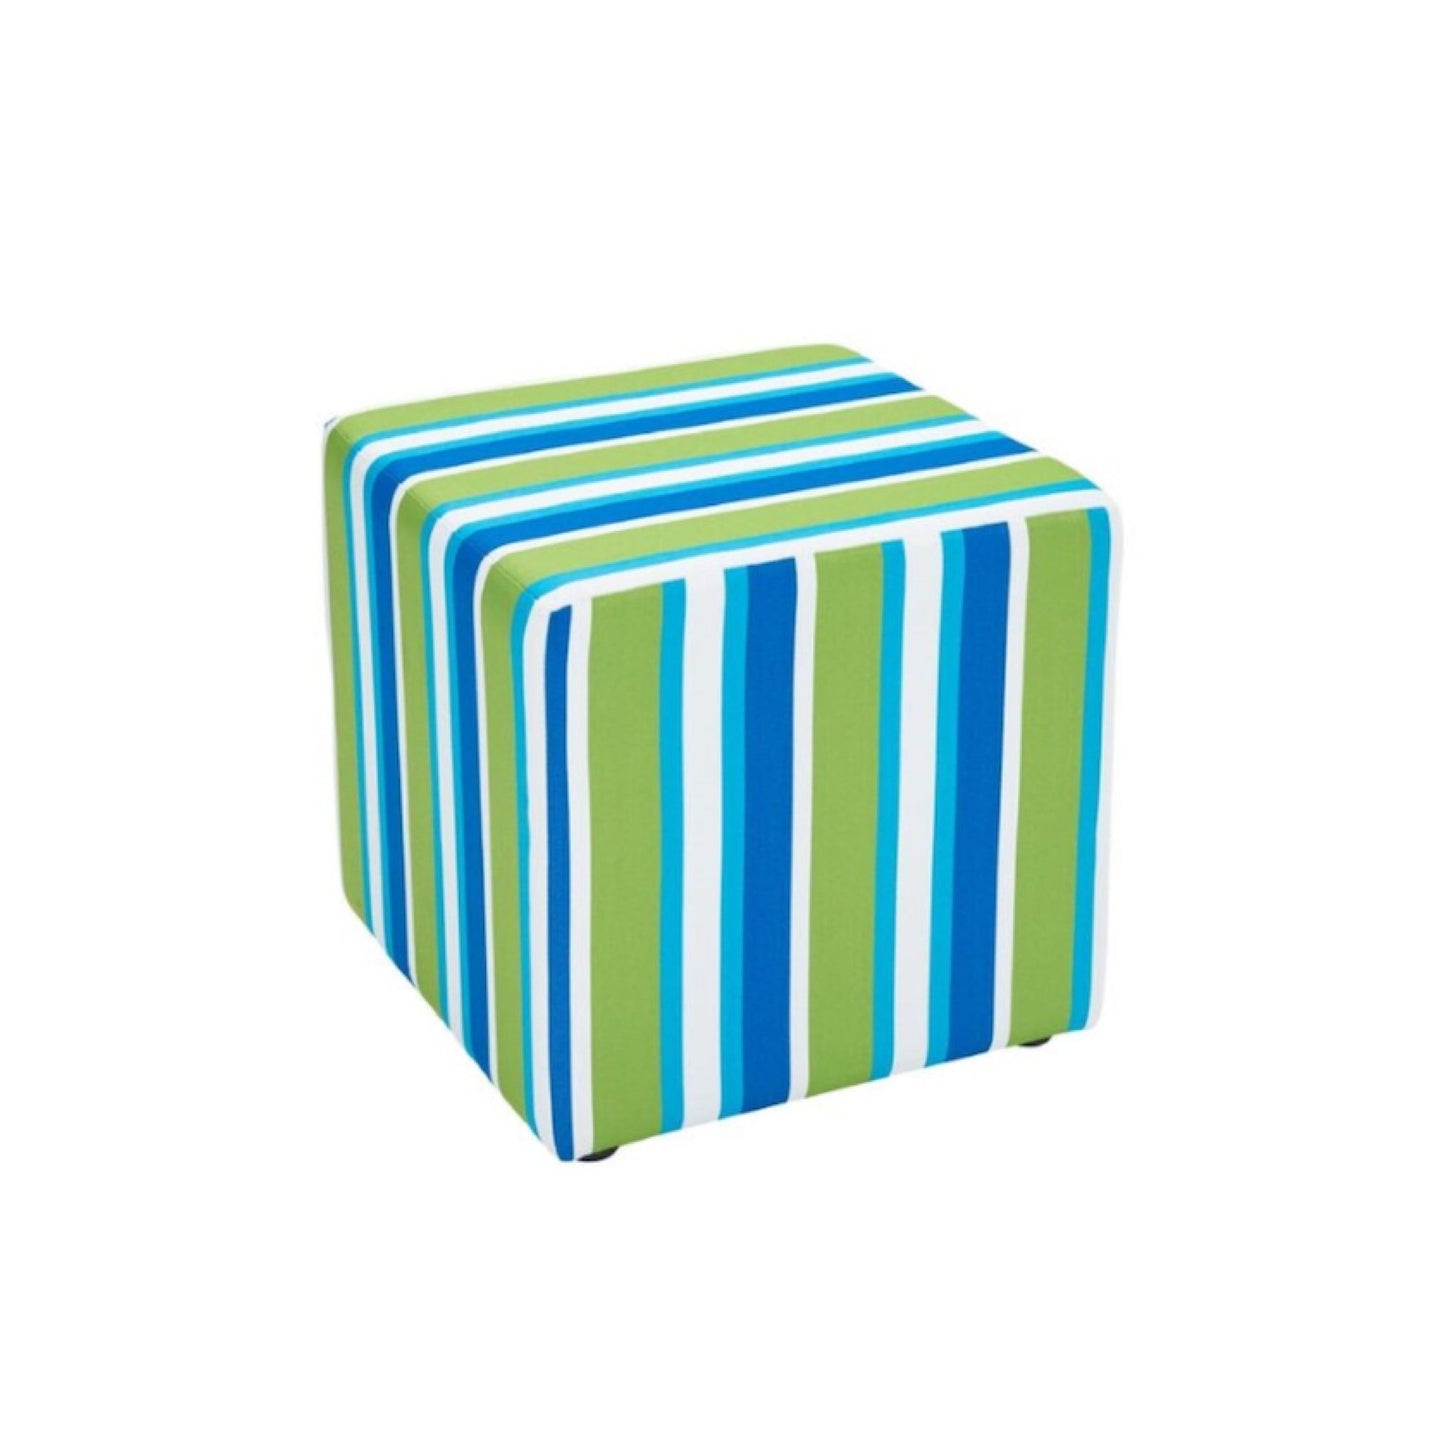 OUTDOOR CUBE OTTOMAN | ALL WEATHER OUTDOORS FABRIC | MULTIPLE OPTIONS AVAILABLE | MADE TO ORDER IN WA